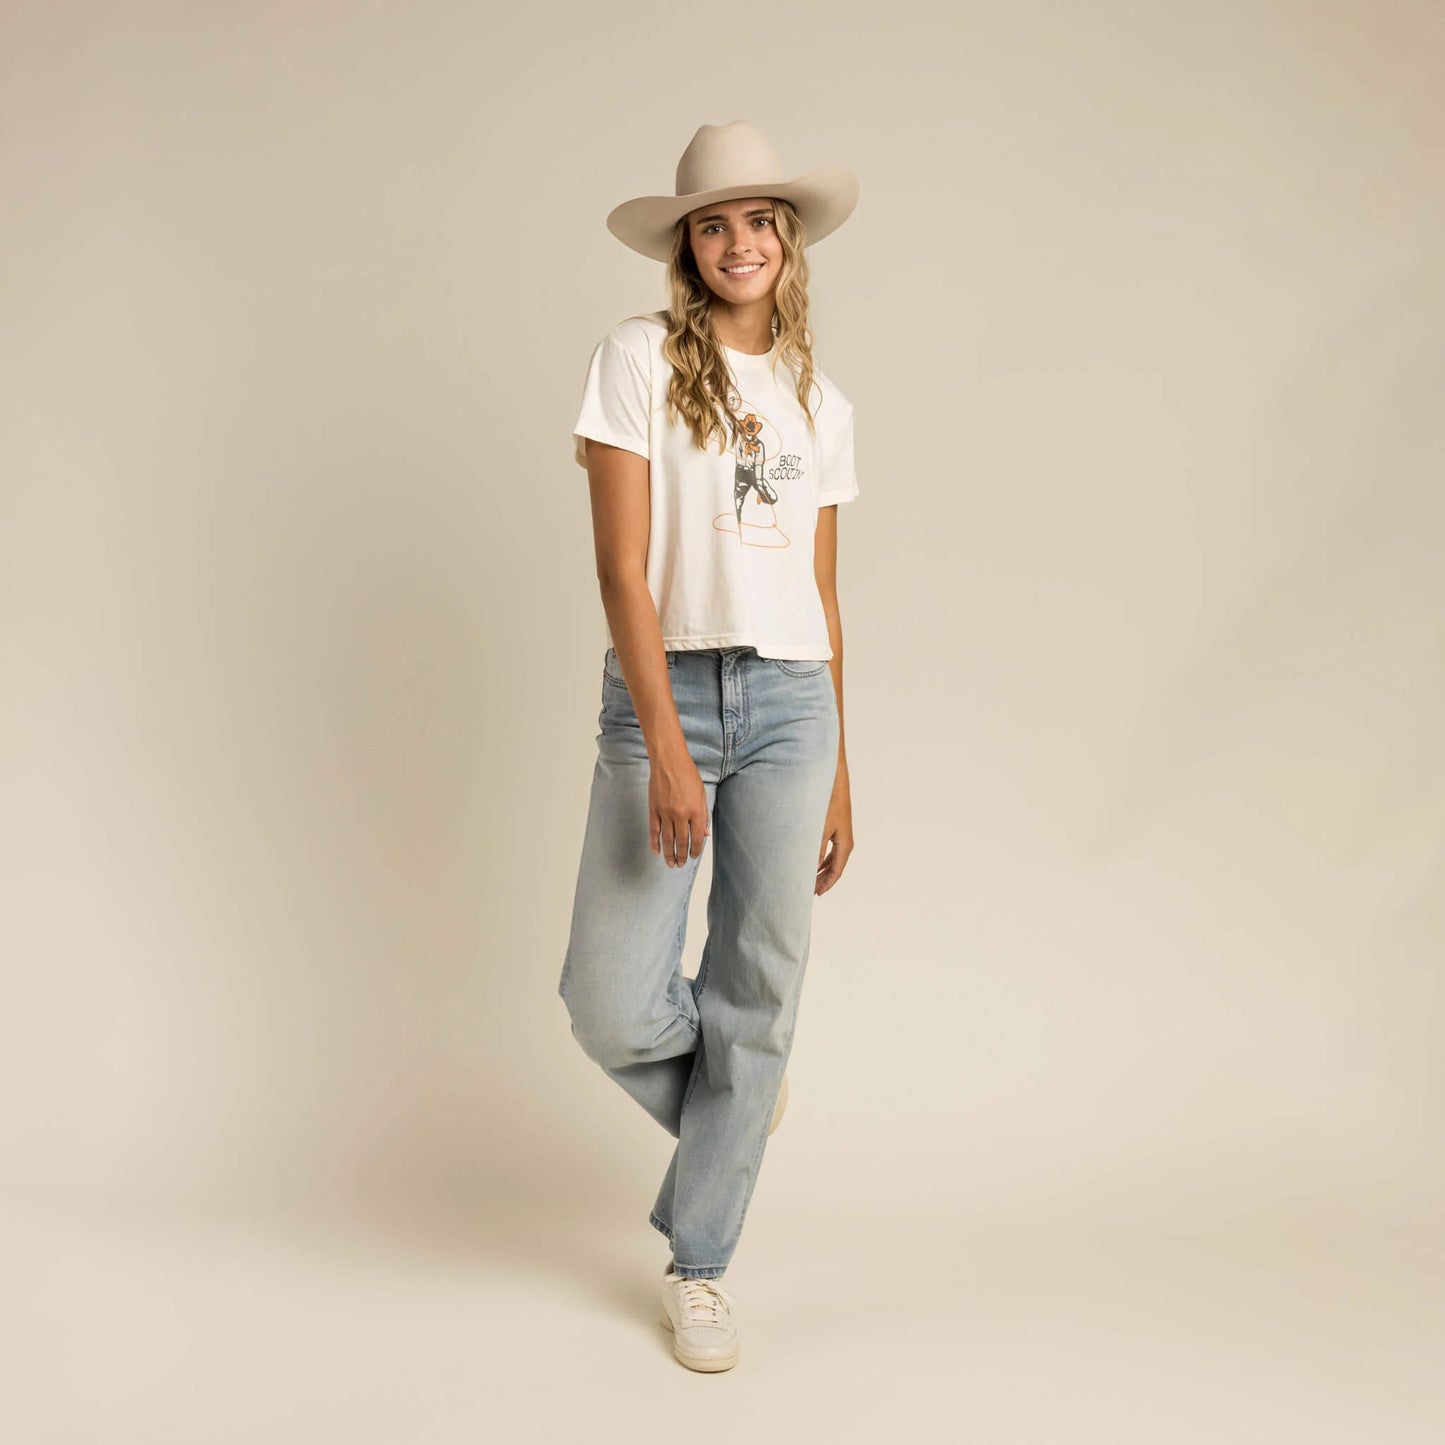 Boot Scootin' Women's cropped graphic t-shirt at 6Whiskey six whisky sendero provisions western wear rodeo vibes